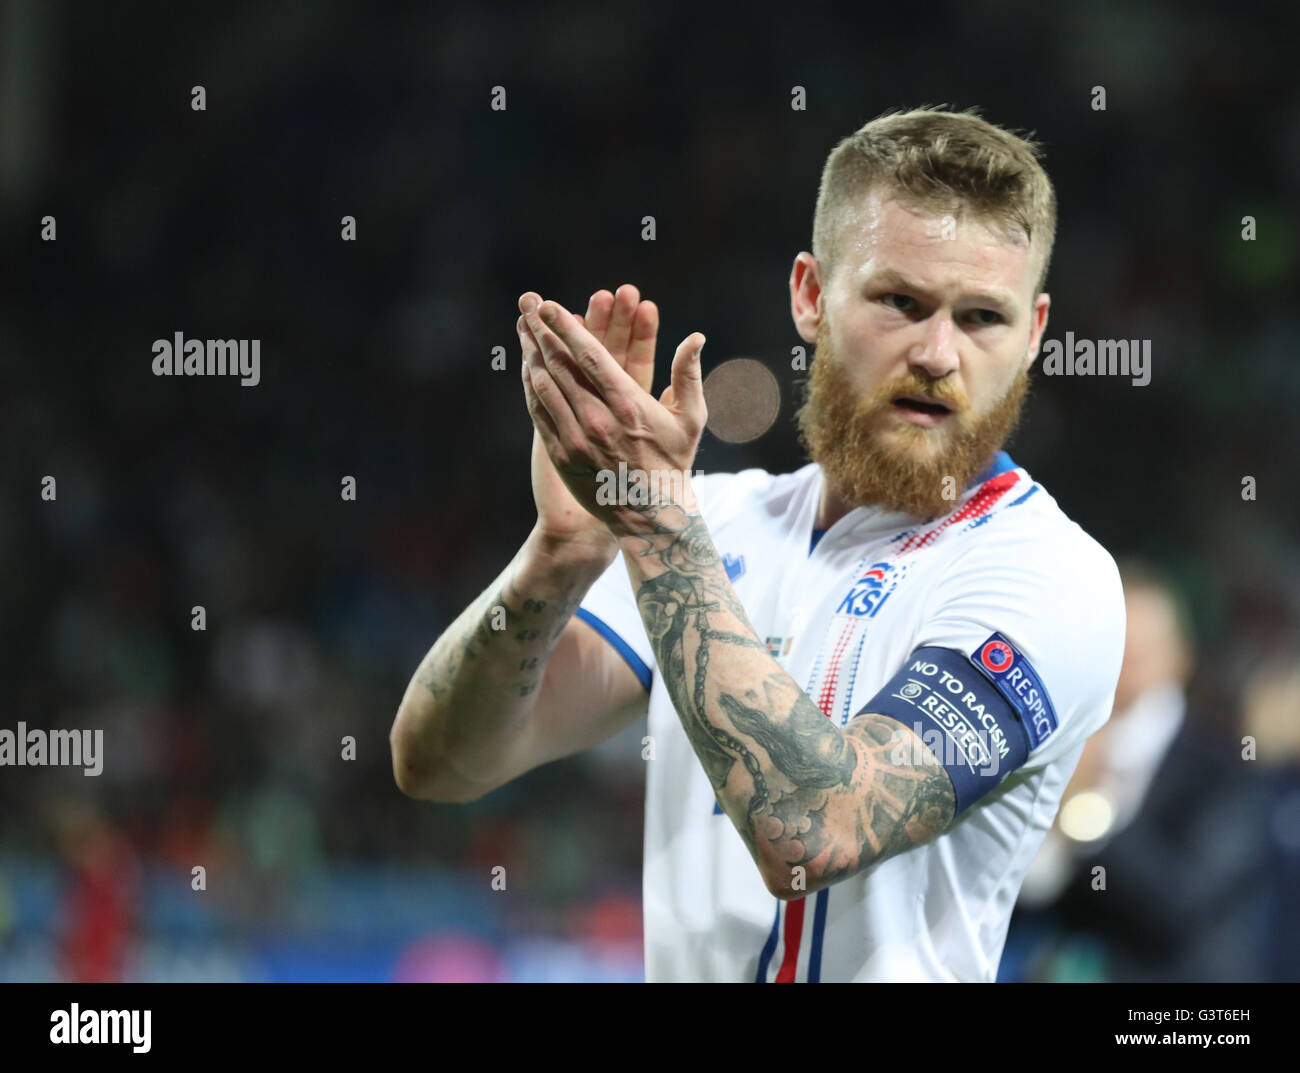 (160615) -- SAINT-ETIENNE, June 15, 2016 (Xinhua) -- Aron Gunnarsson of Iceland greets the spectators after the Euro 2016 Group F soccer match between Portugal and Iceland in Saint-Etienne, France, June 14, 2016. The match ended with a 1-1 draw. (Xinhua/Bai Xuefei) Stock Photo